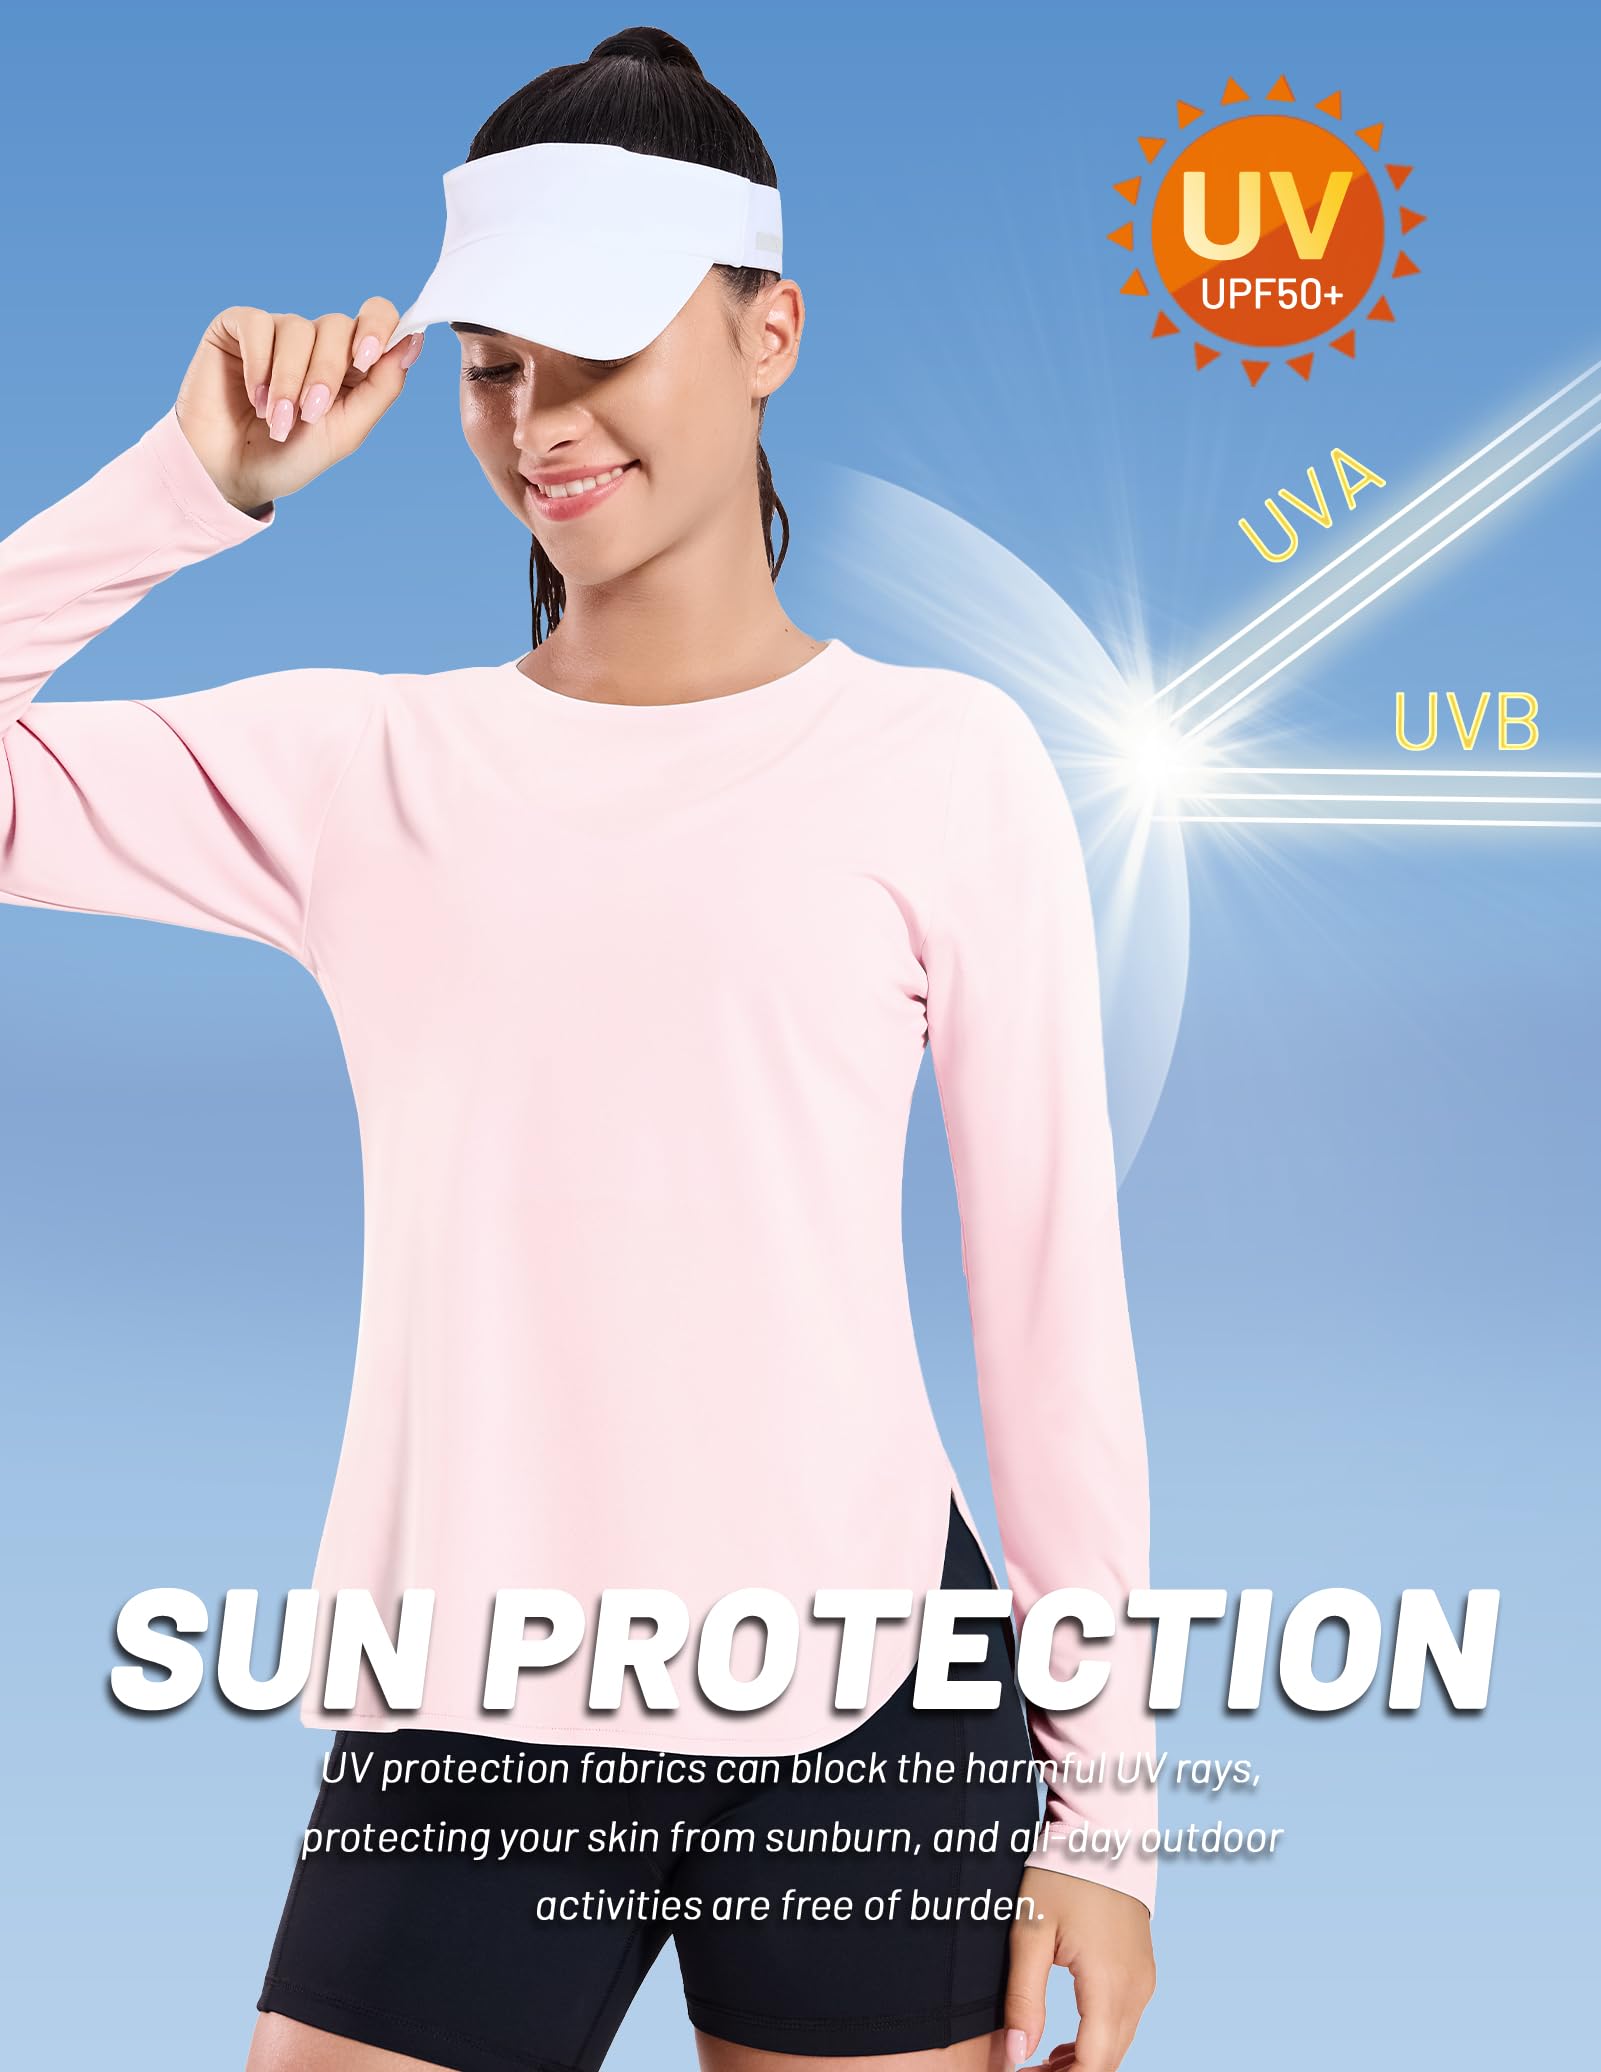 Women's UPF 50+ Sun Shirts Athletic Dry Fit Tops